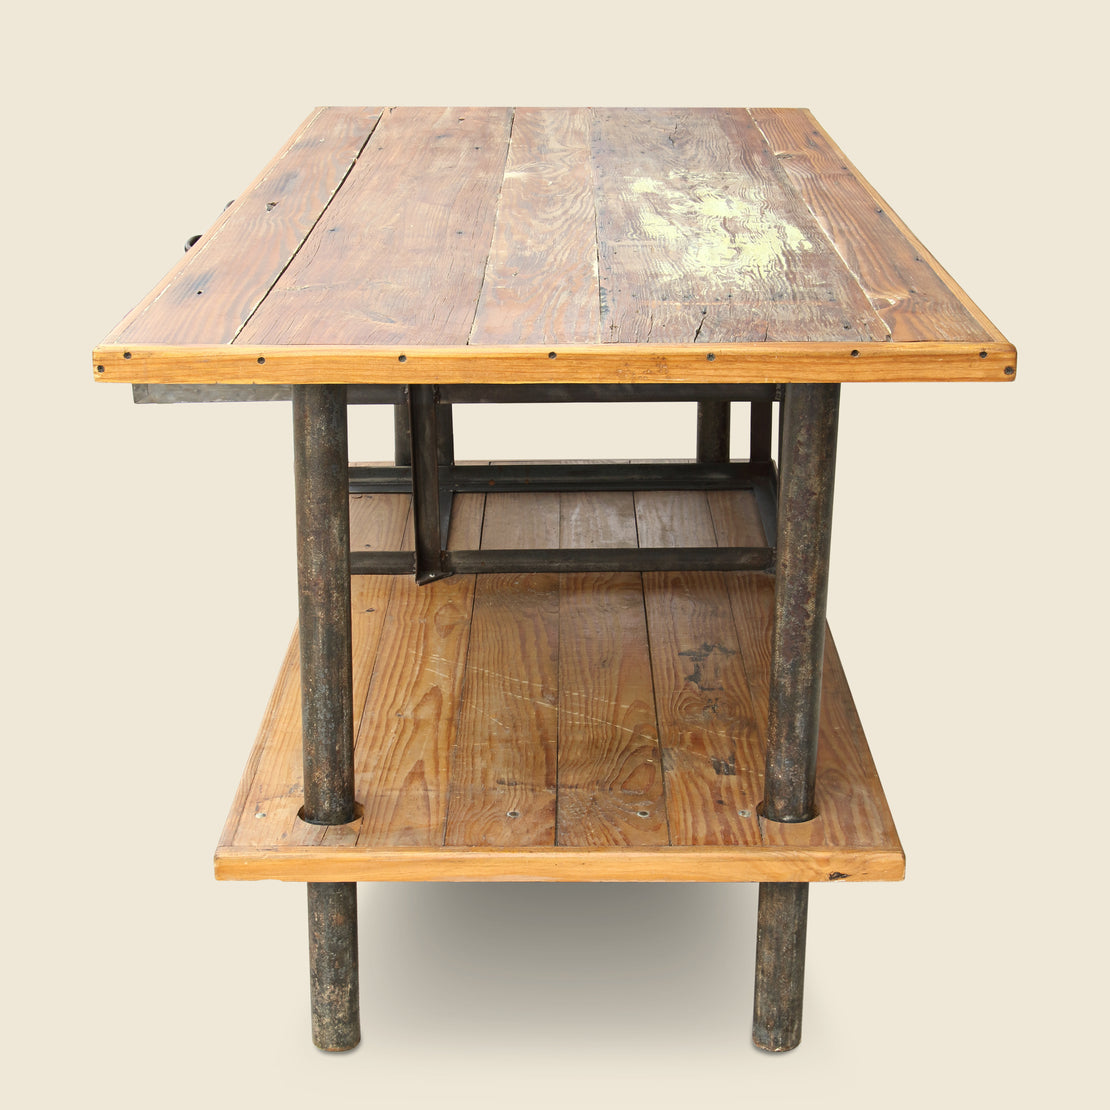 Wooden Industrial Table with Metal Drawers